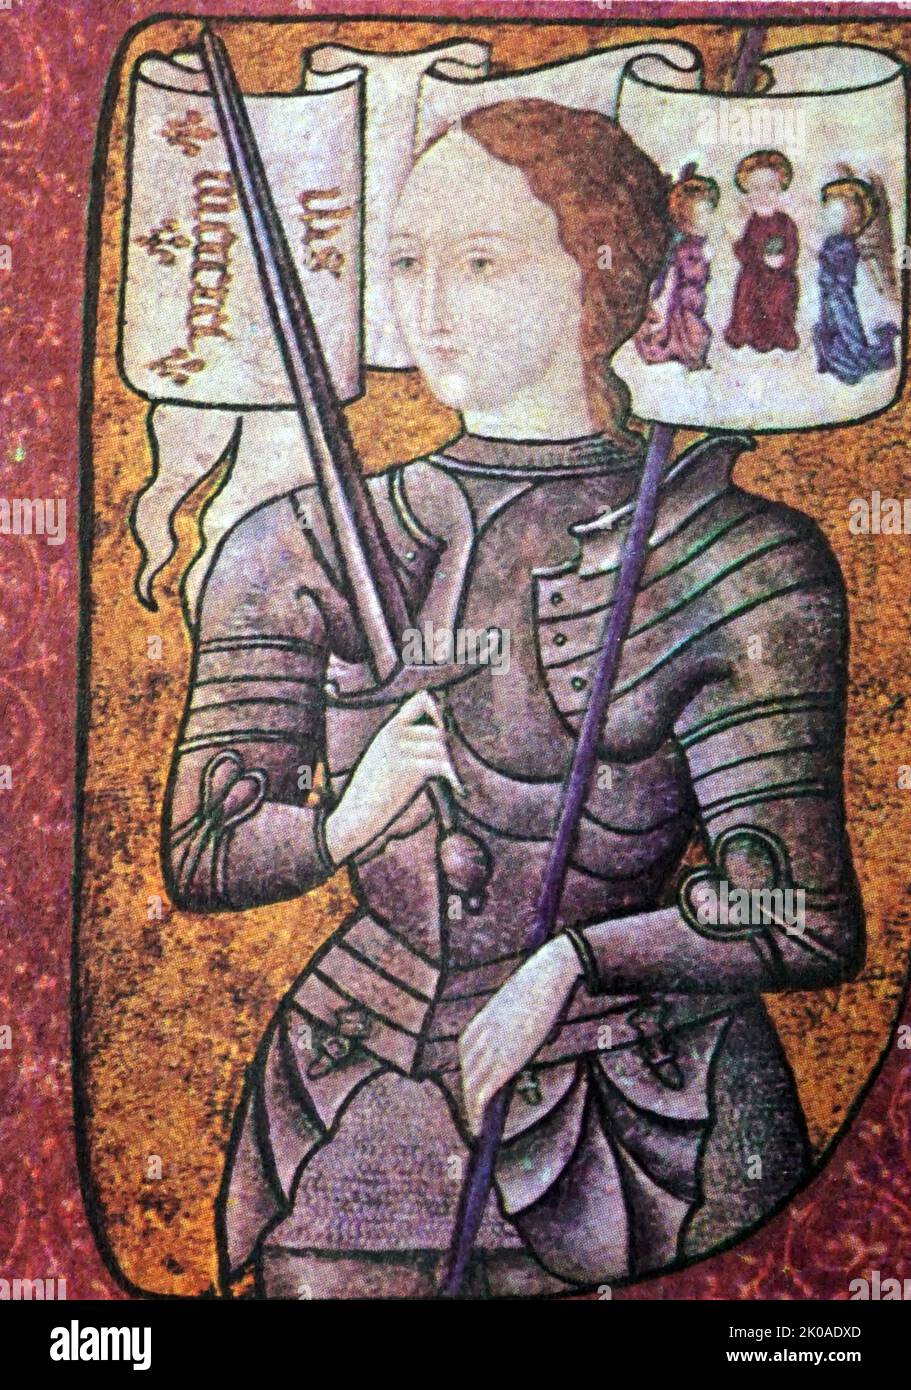 Historiated initial depicting Joan of Arc from Archives Nationales, Paris, AE II 2490, allegedly dated to the second half of the 15th century but most likely an art forgery by the Alsatian painter Georges Spetz (1844-1914) in the late 19th or early 20th centuries Stock Photo